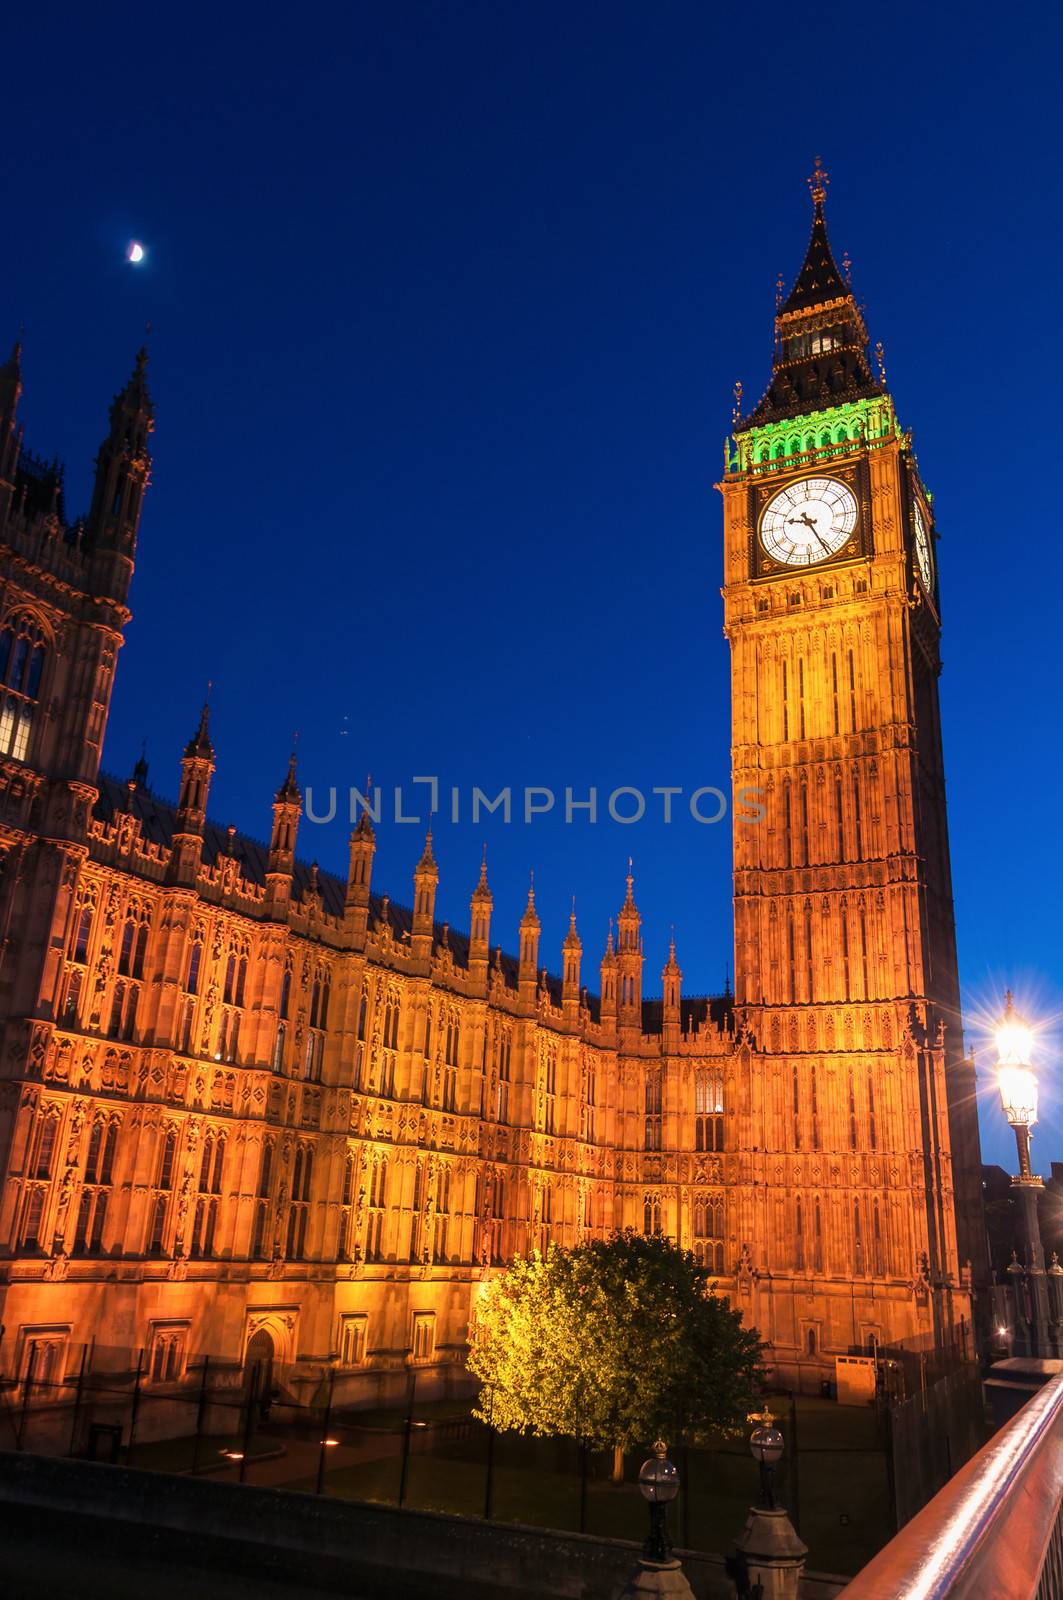 Big Ben, famous clock tower of Houses of Parliament in London at night, Great Britain